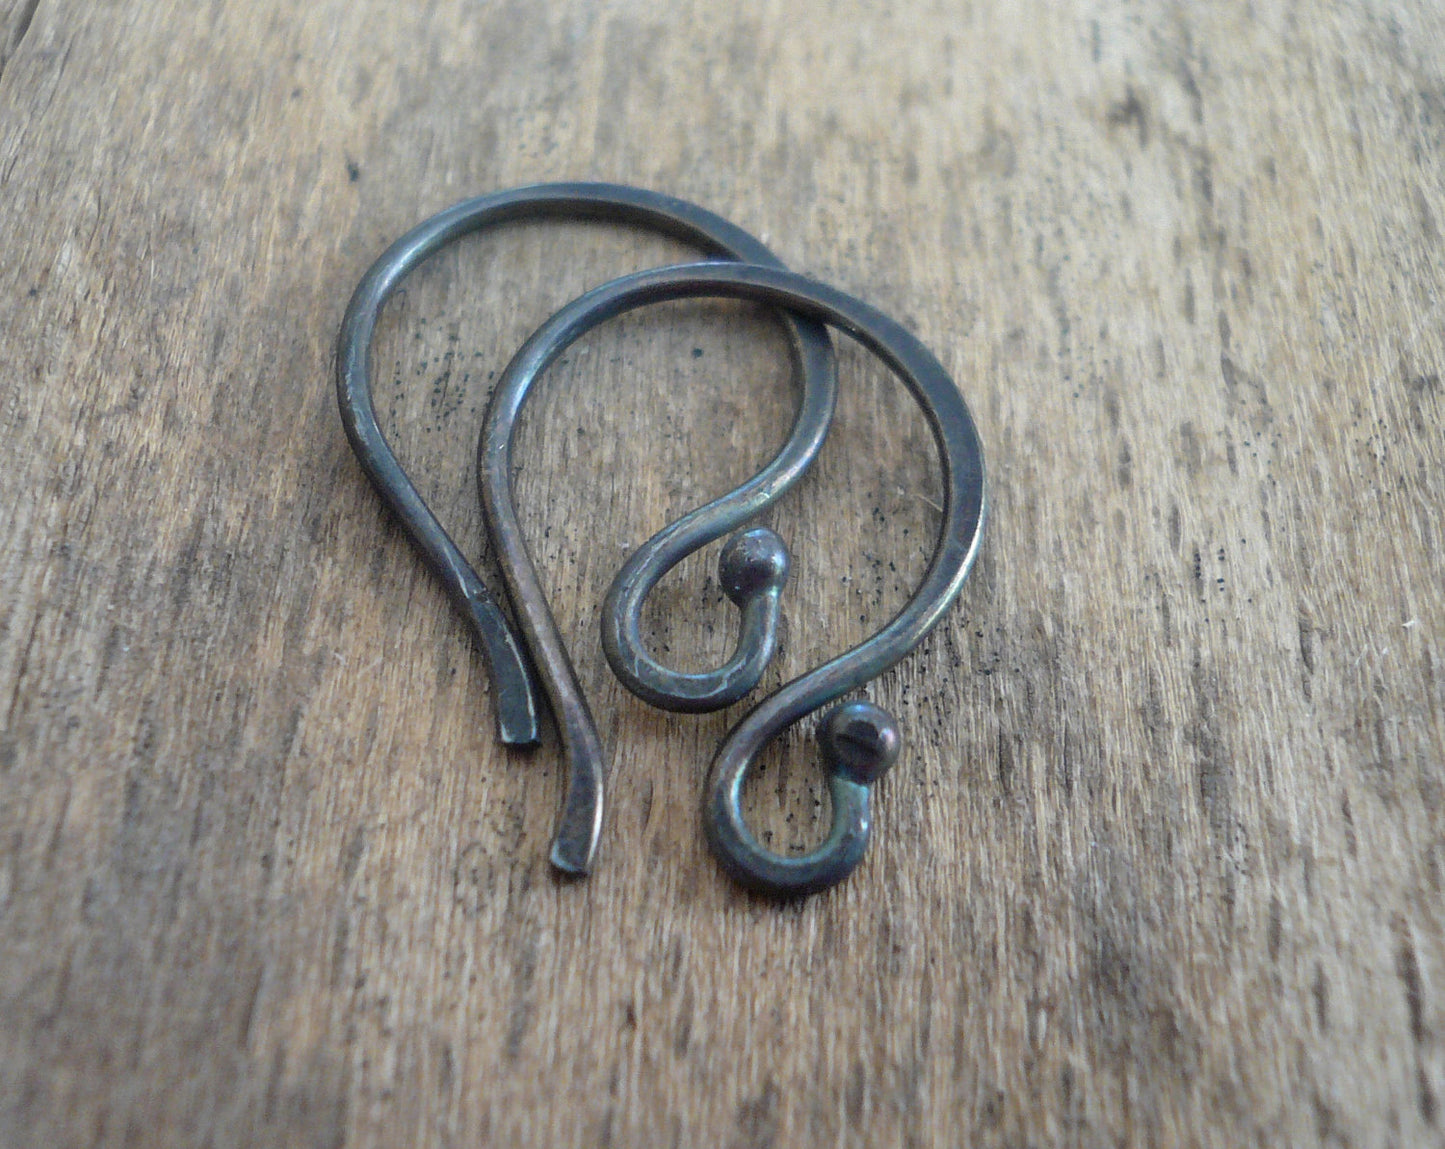 12 pairs of my Ball End Twinkle Fine Silver Earwires - Handmade. Handforged. Heavily Oxidized